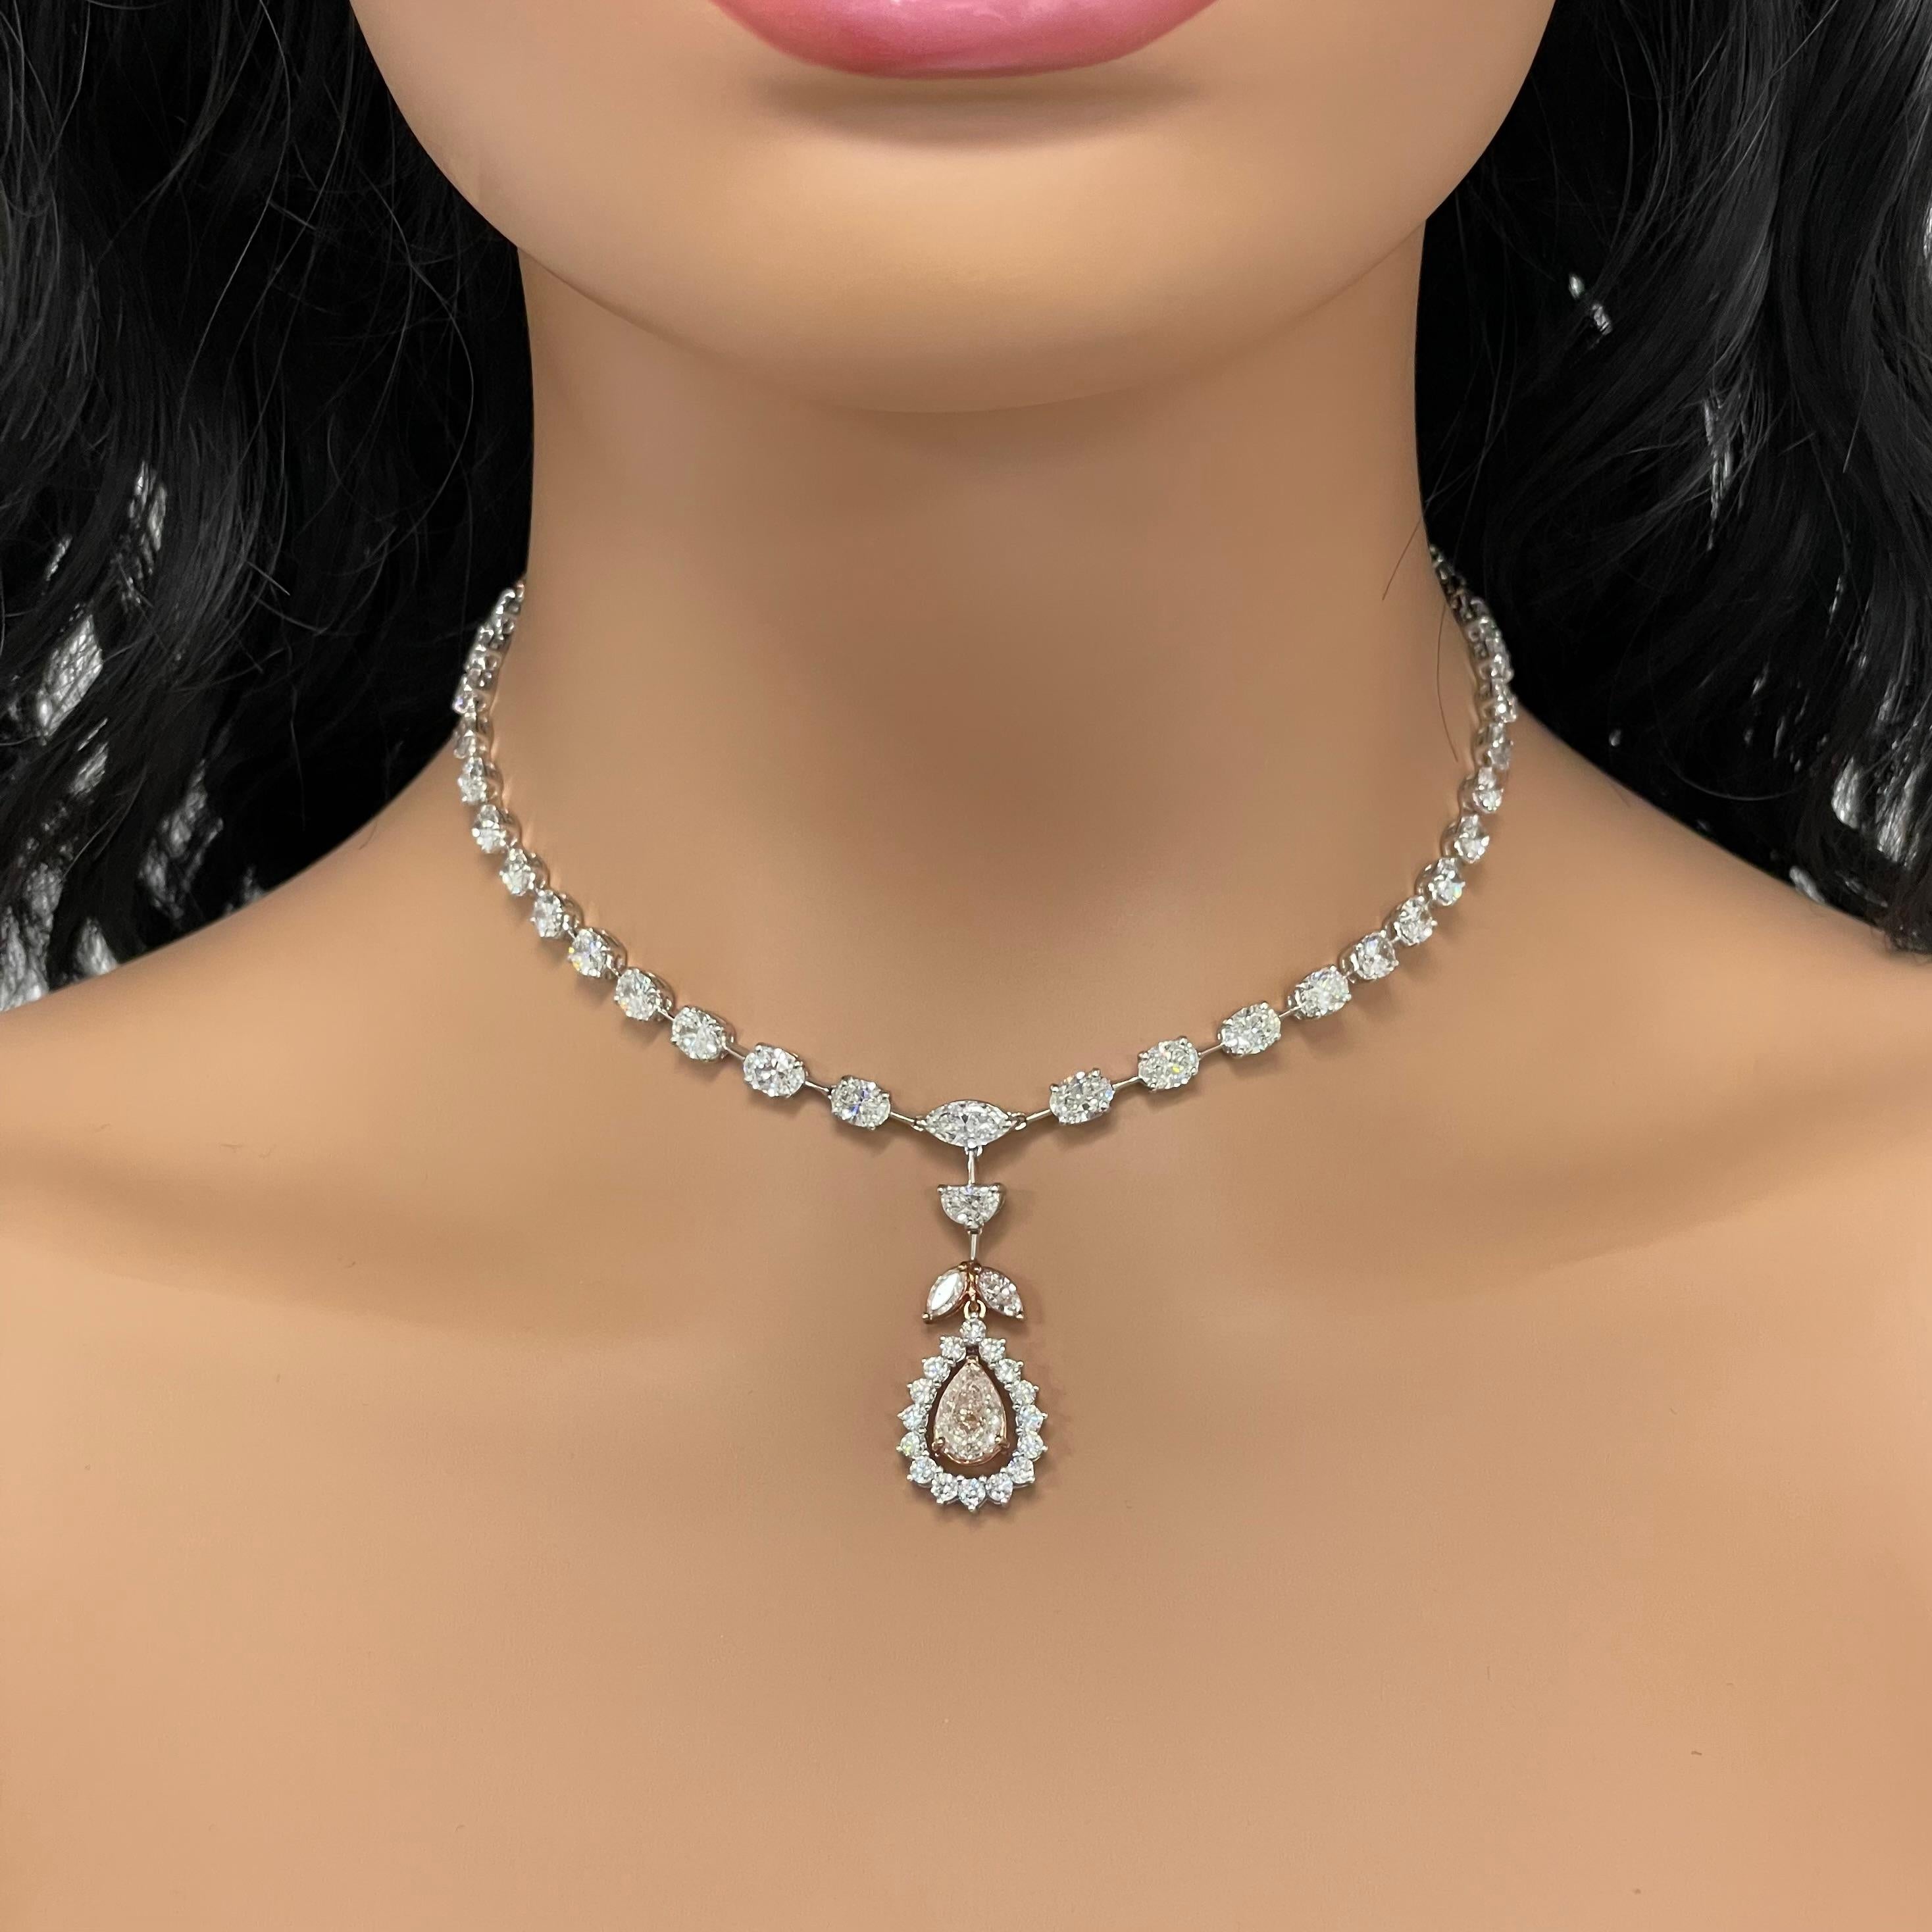 The Maira Diamond Necklace celebrates color diamonds. With a low color center that appears orangey pink in setting, the necklace showcases a pronounced string of solitaires that exude style and grace.

Diamonds Shapes: Pear Shape, Marquise, Oval,